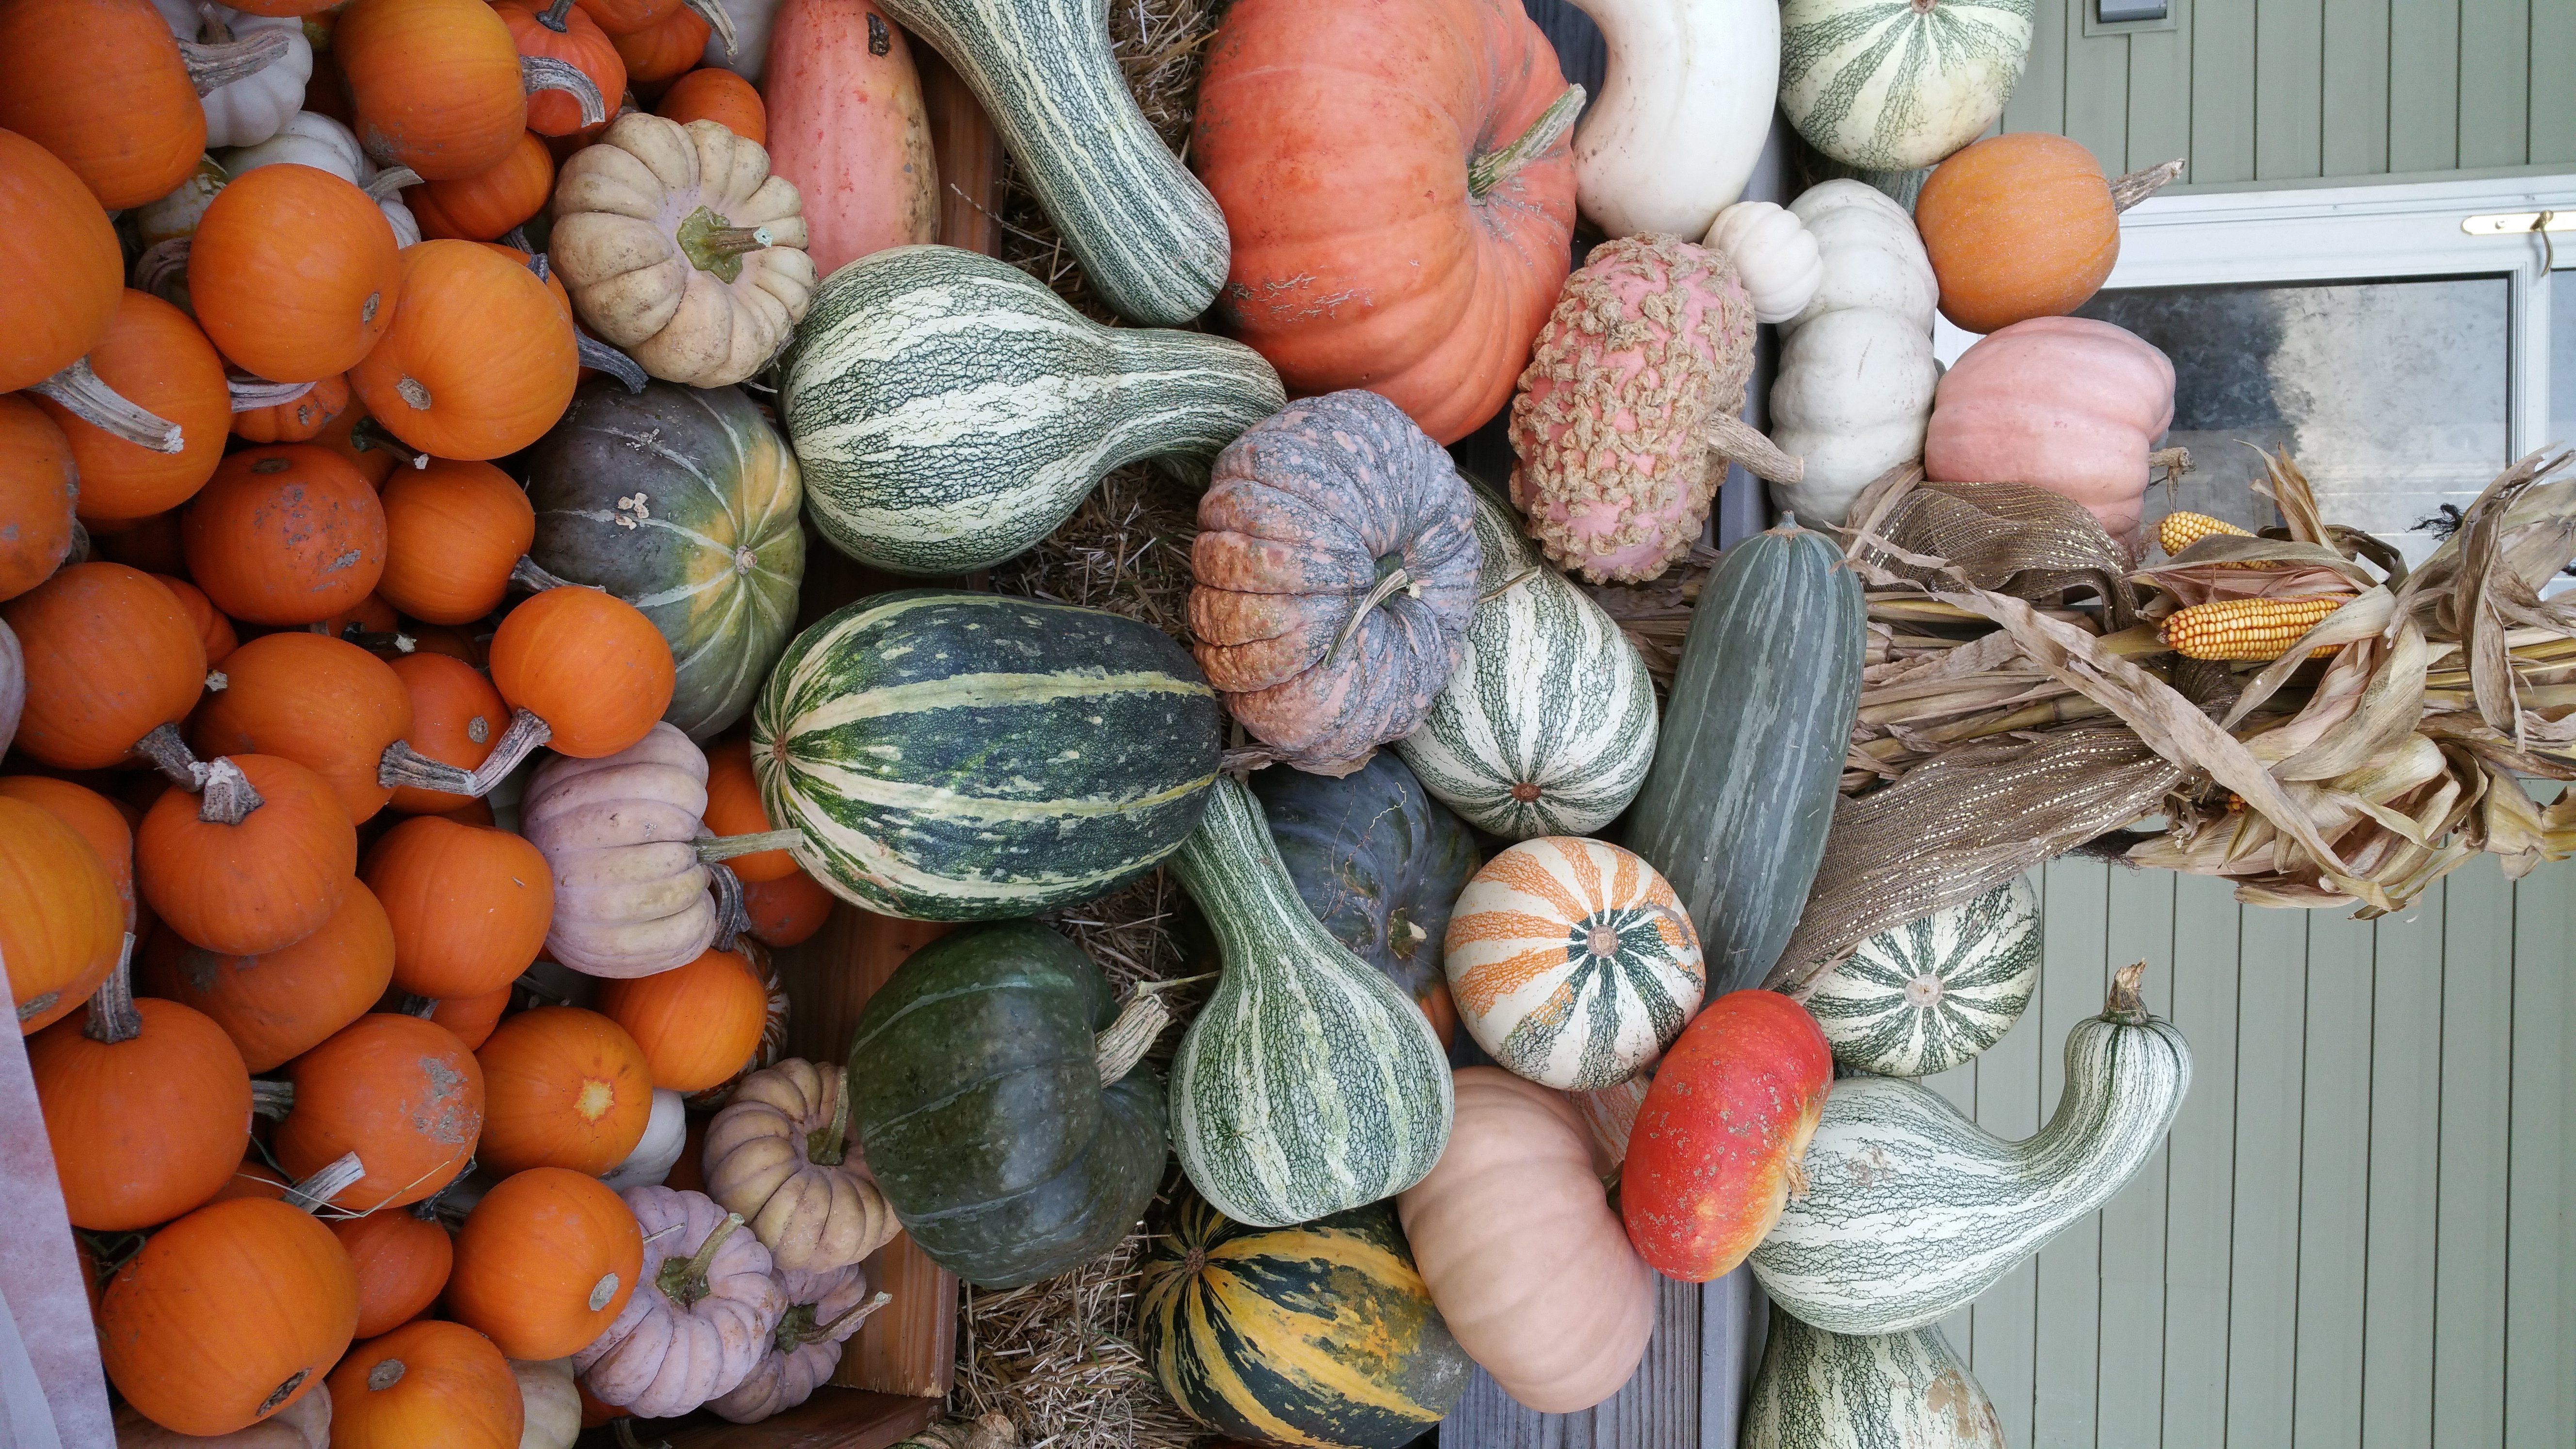 Next Happening: Winter Squash is here